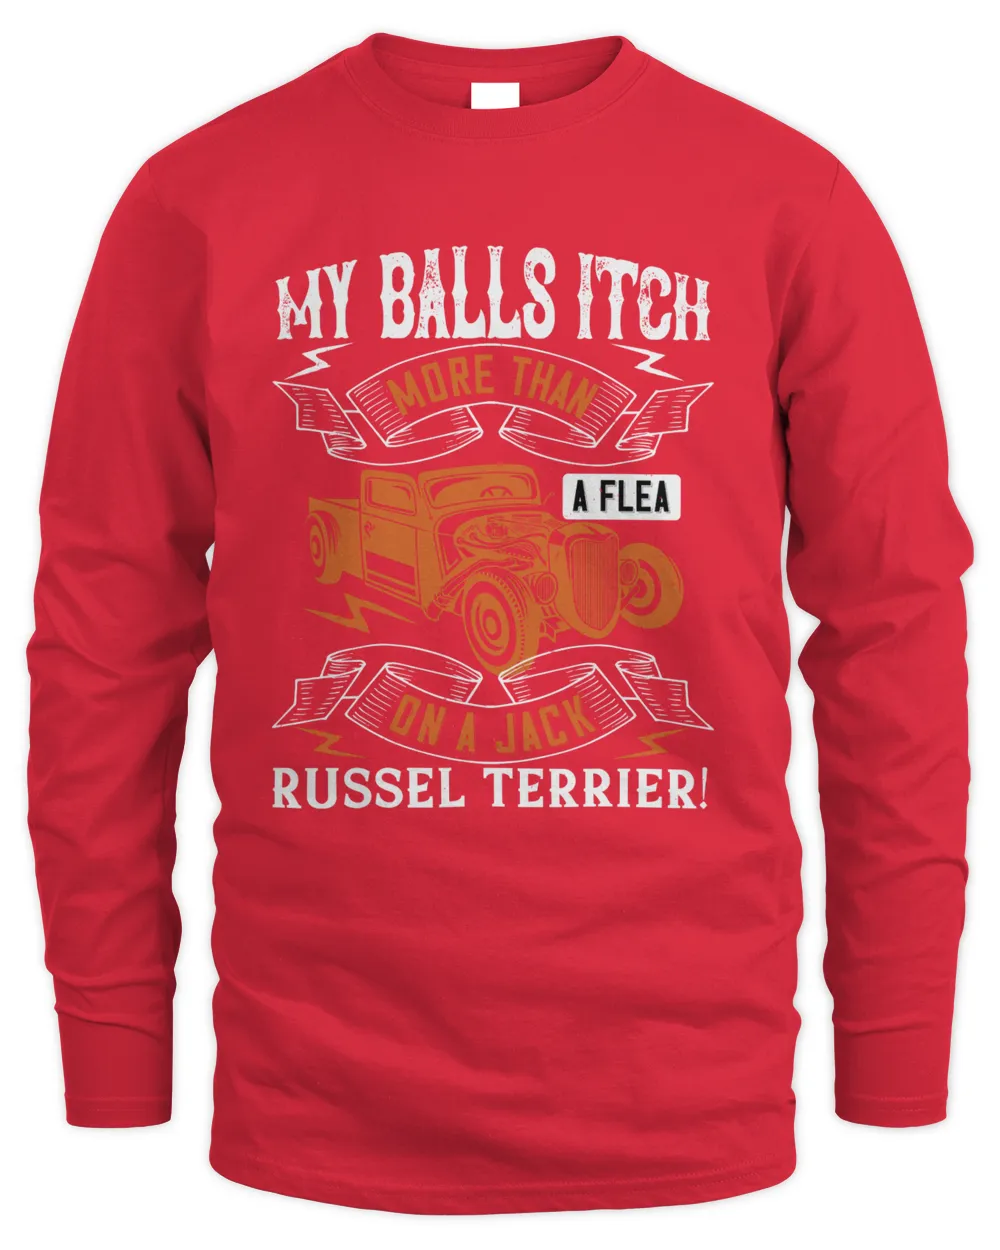 My balls itch more than a flea on a jack russel terrier!-01